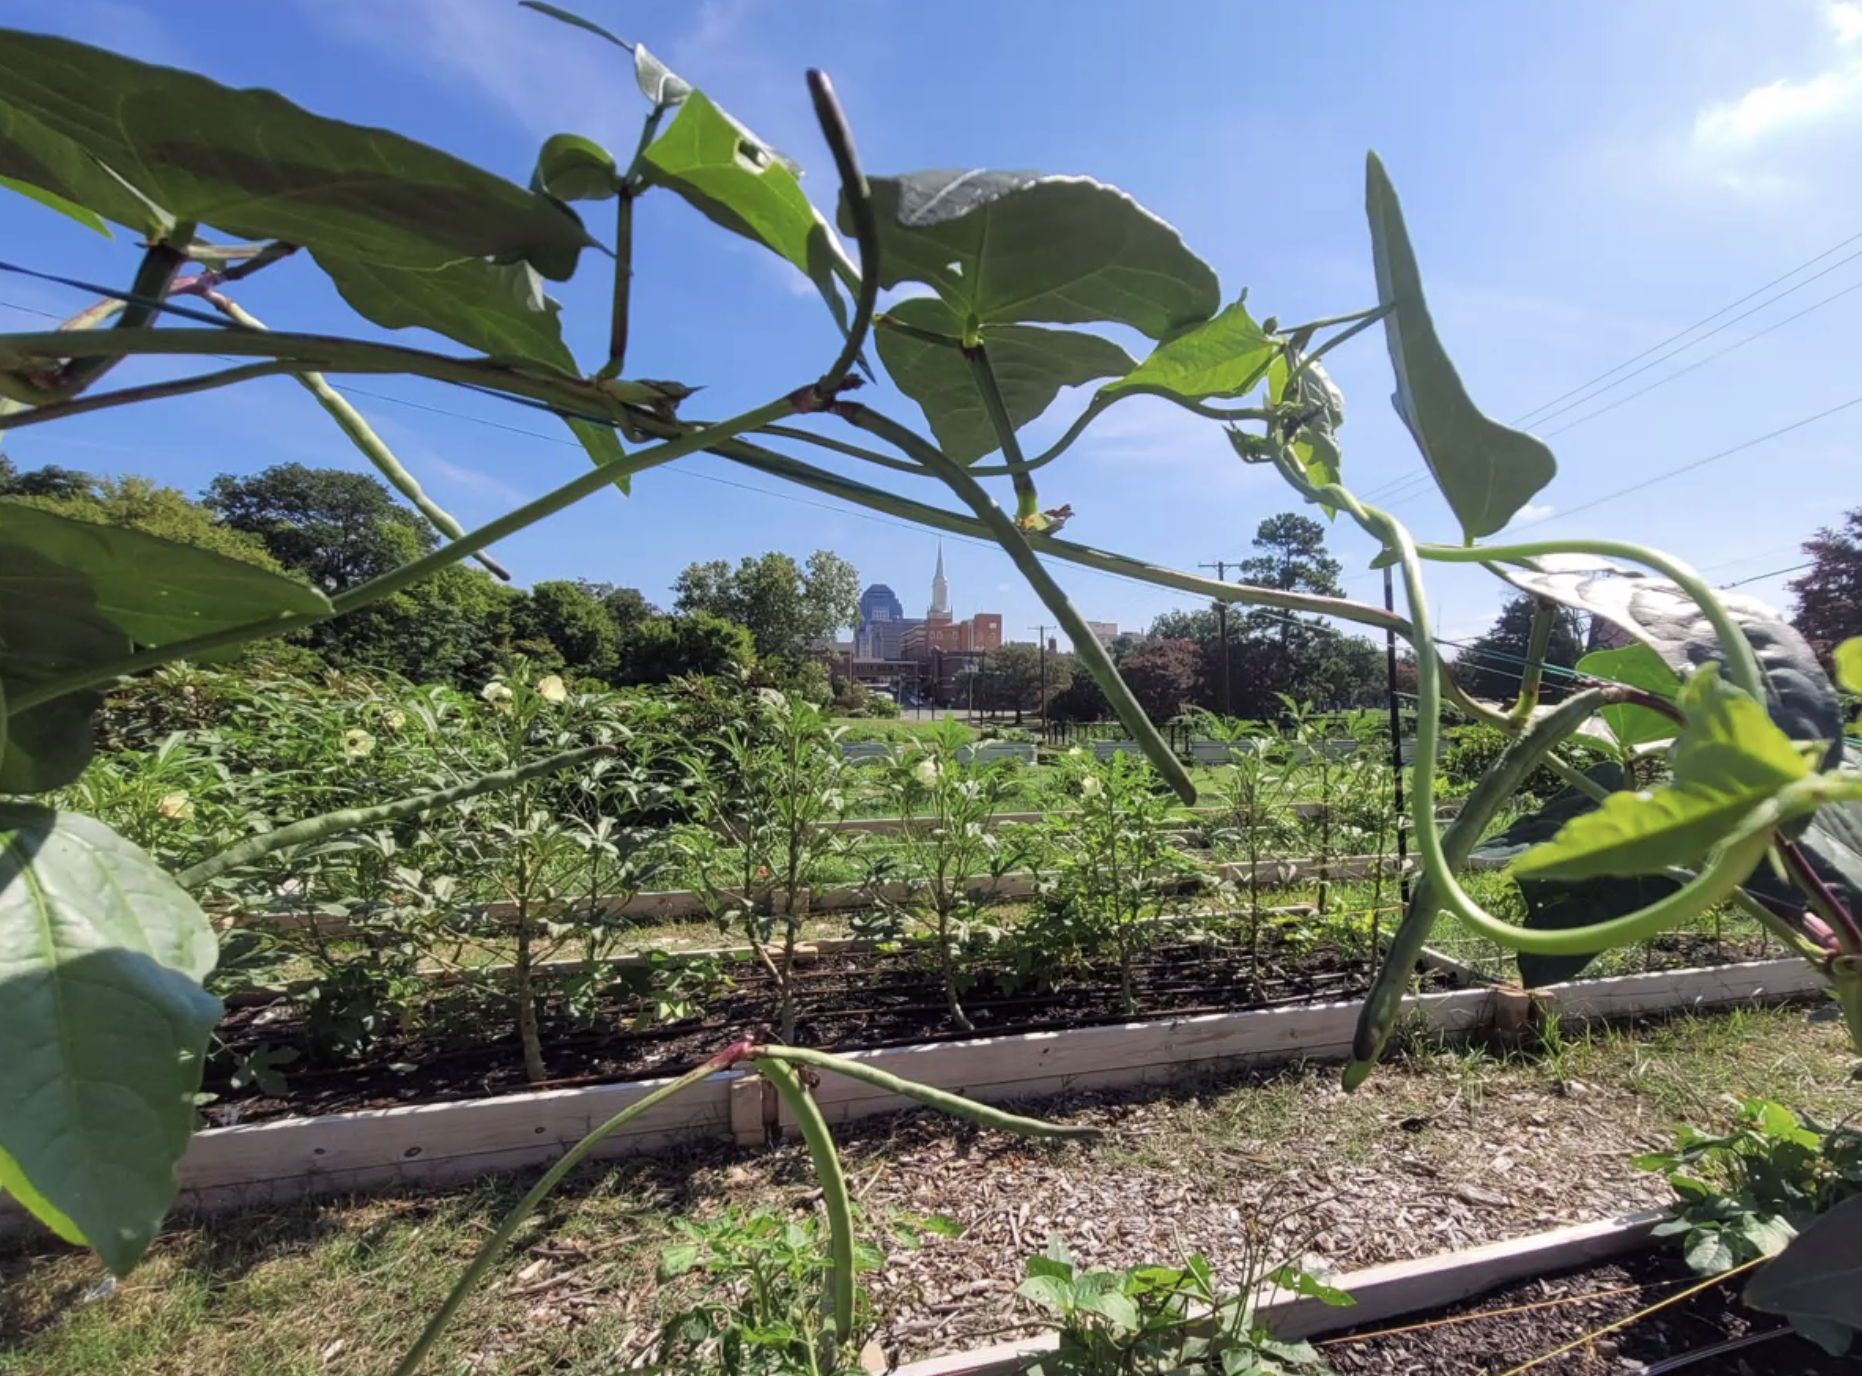 Shreveport Green Addresses Food Insecurity with an Urban Farm